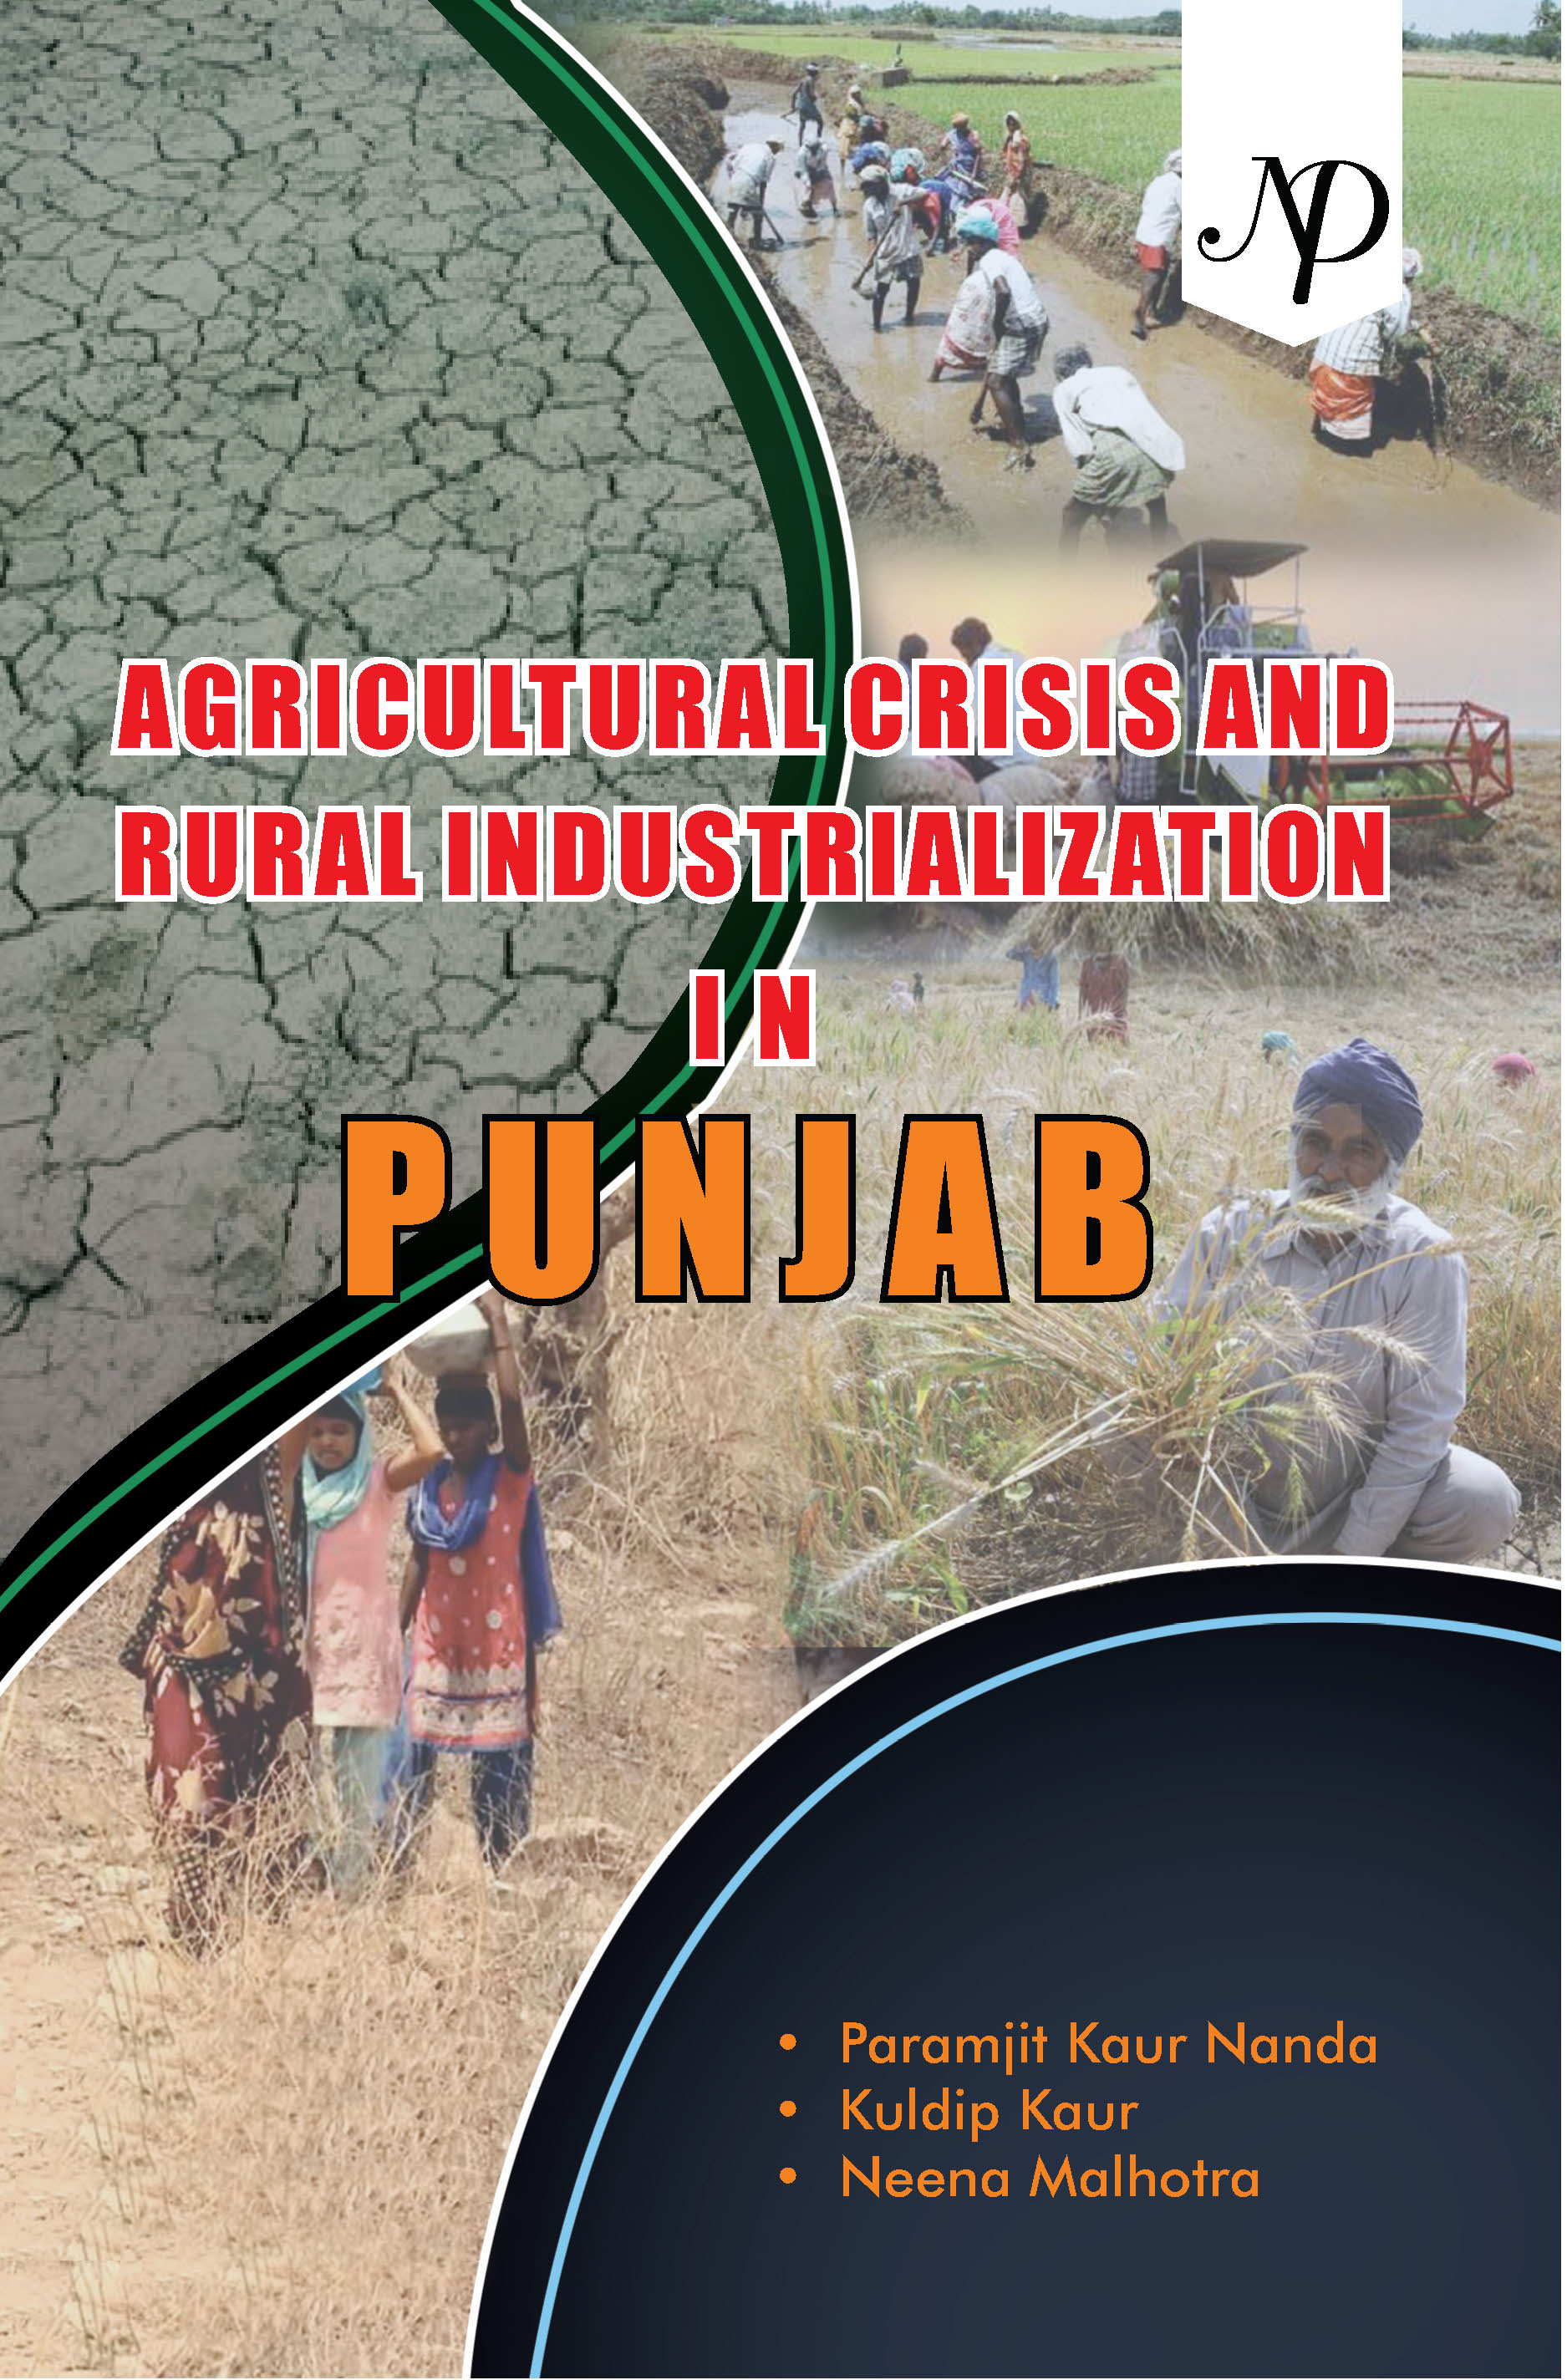 Agricultural crisis and Rural industrialization in Punjab cover.jpg